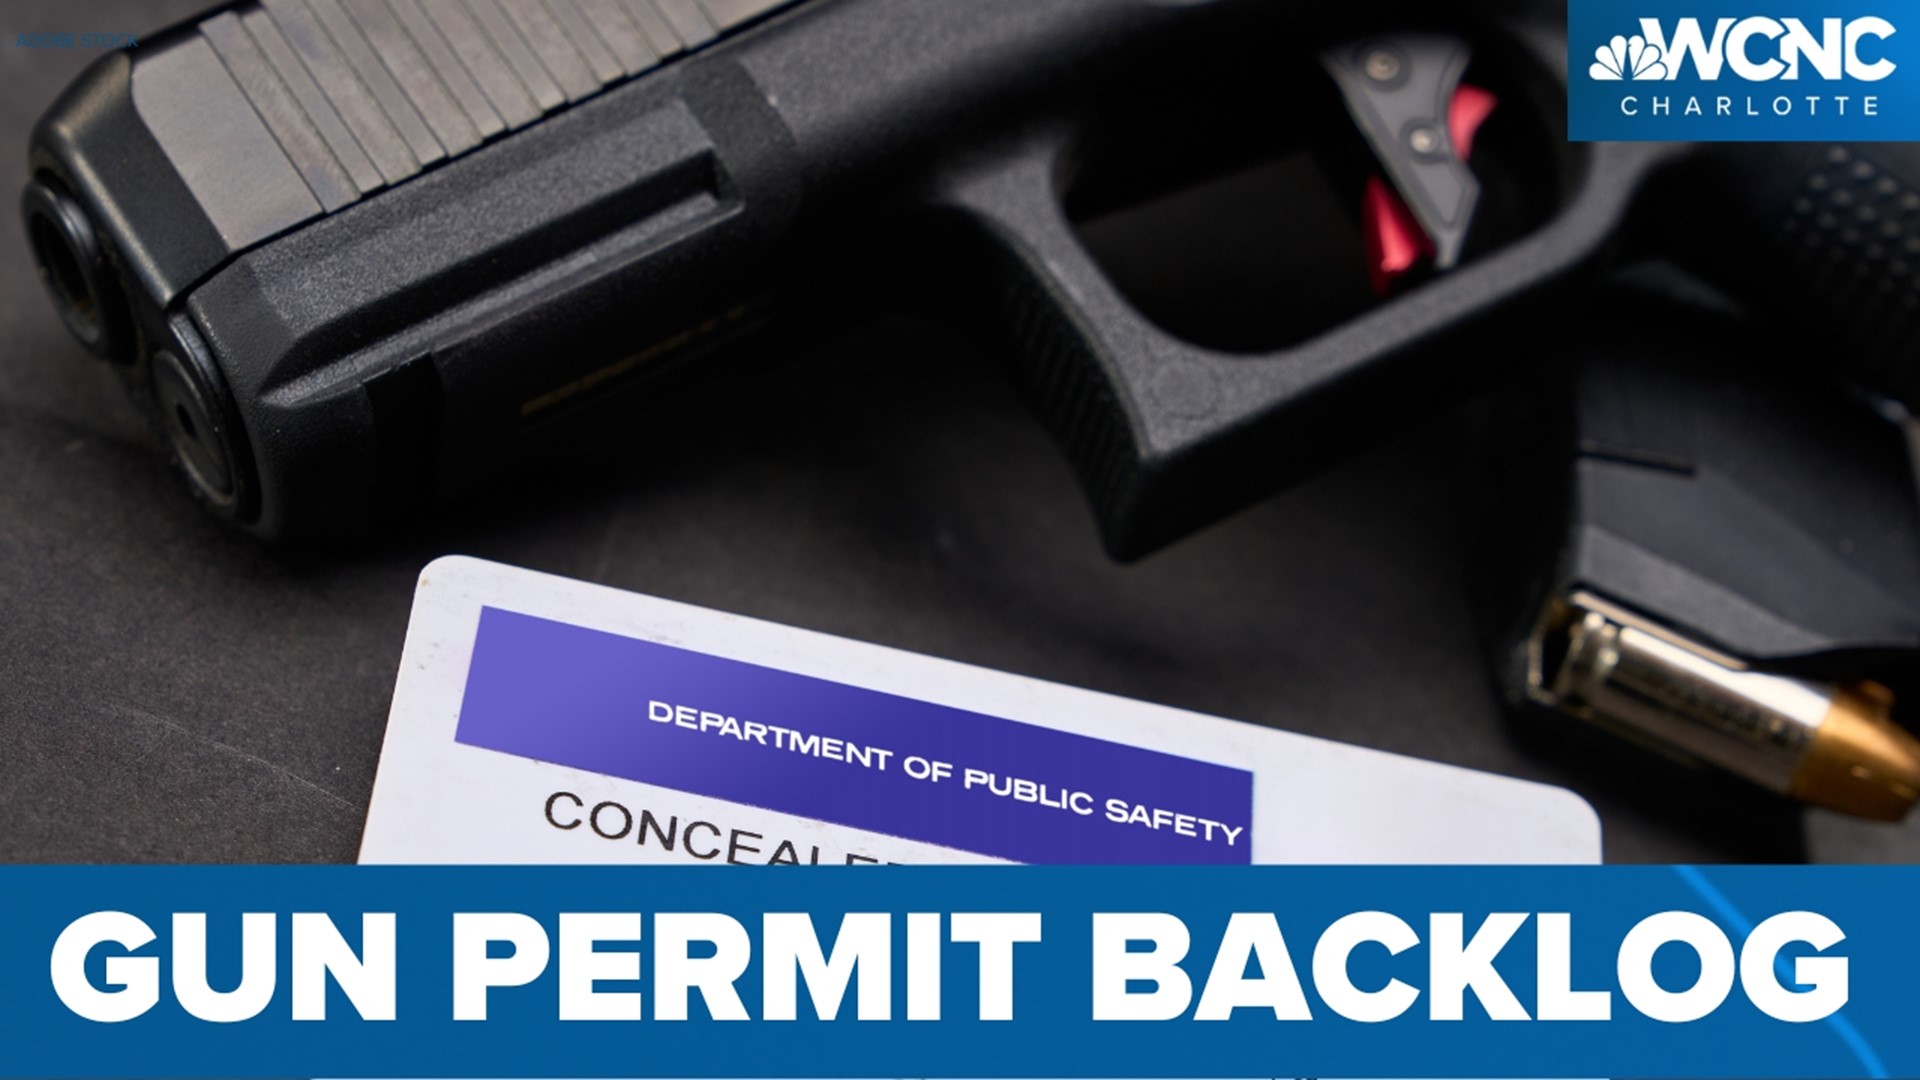 Thousands of applicants are still waiting to receive their permit.